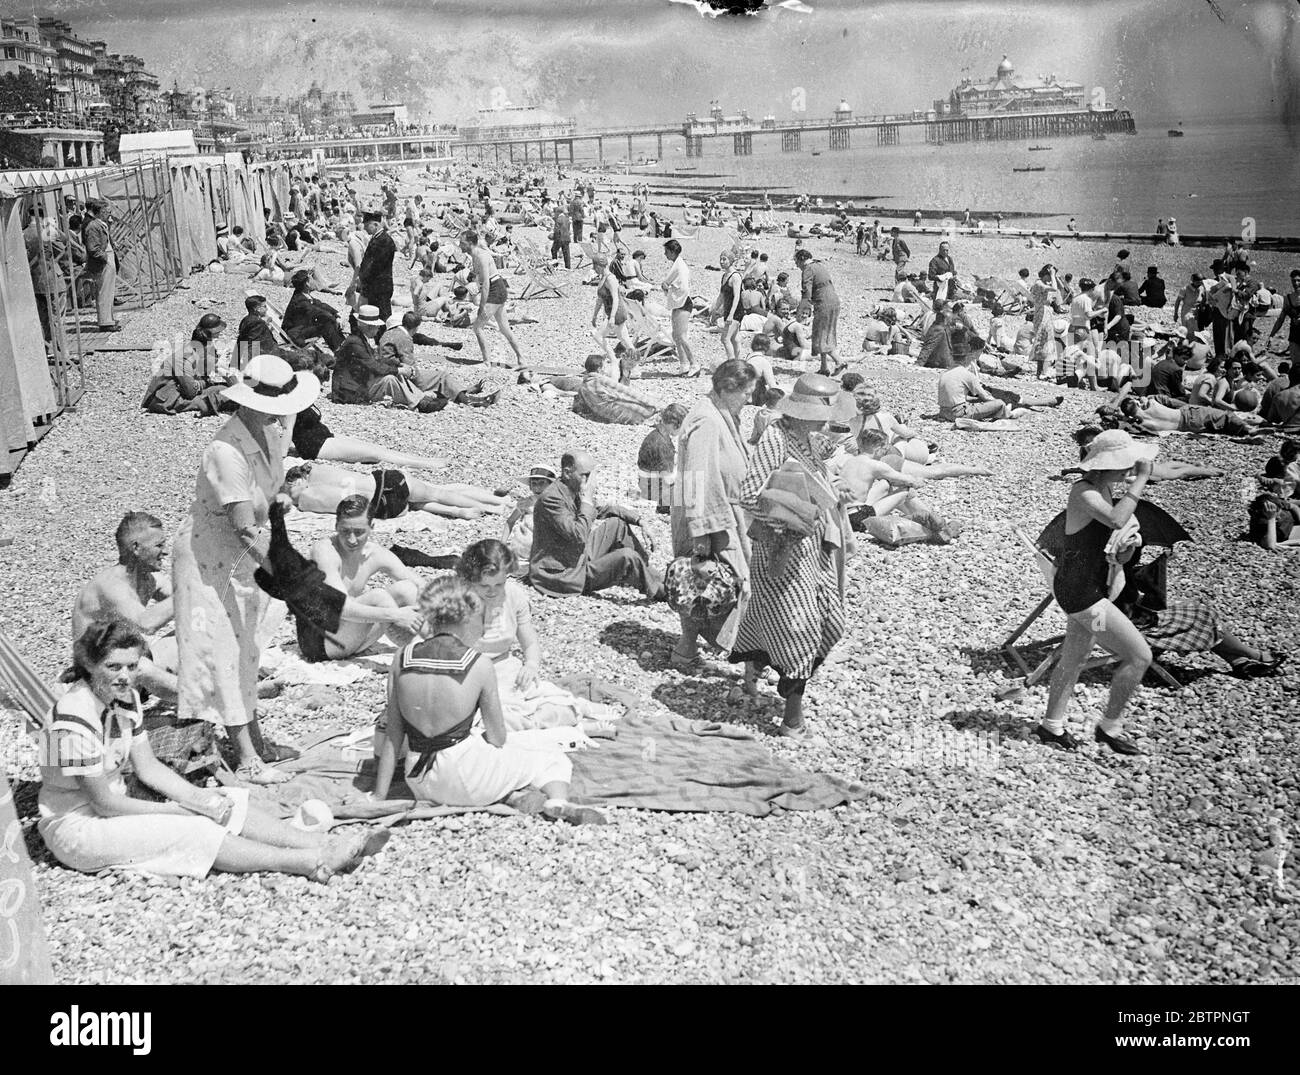 Sunday crowds at Eastbourne. Eastbourne was crowded with Sunday visitors who enjoyed the warm sunshine and sea breezes. Photo shows: the beach crowded with visitors at Eastbourne. 6 June 1937 Stock Photo